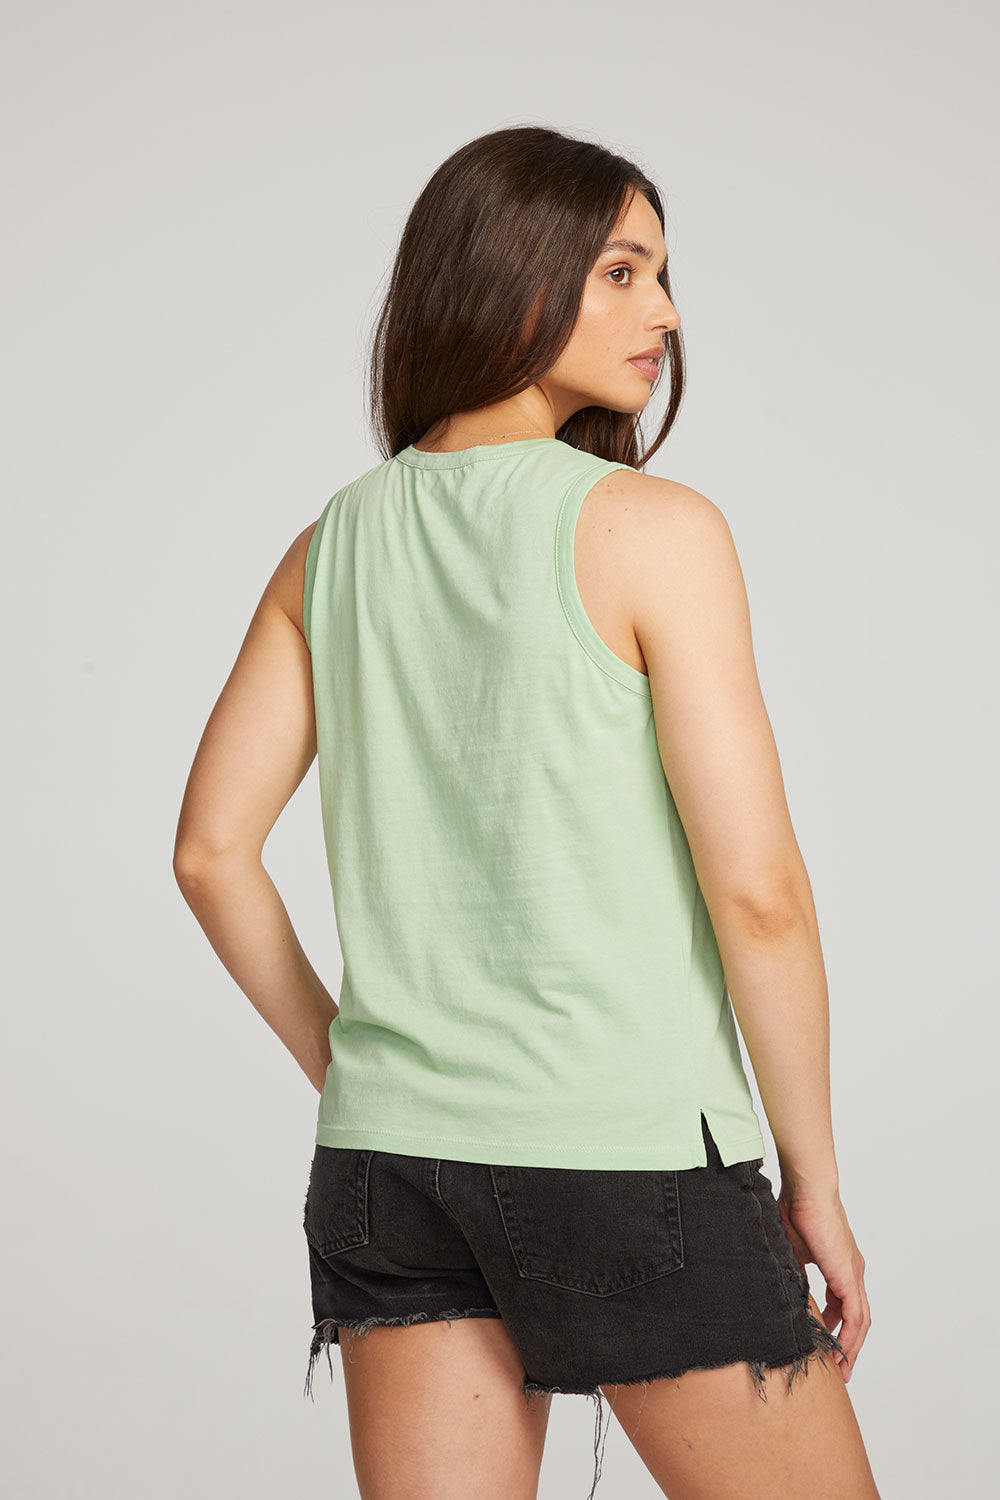 Basic Quiet Green Slit Tank WOMENS chaserbrand